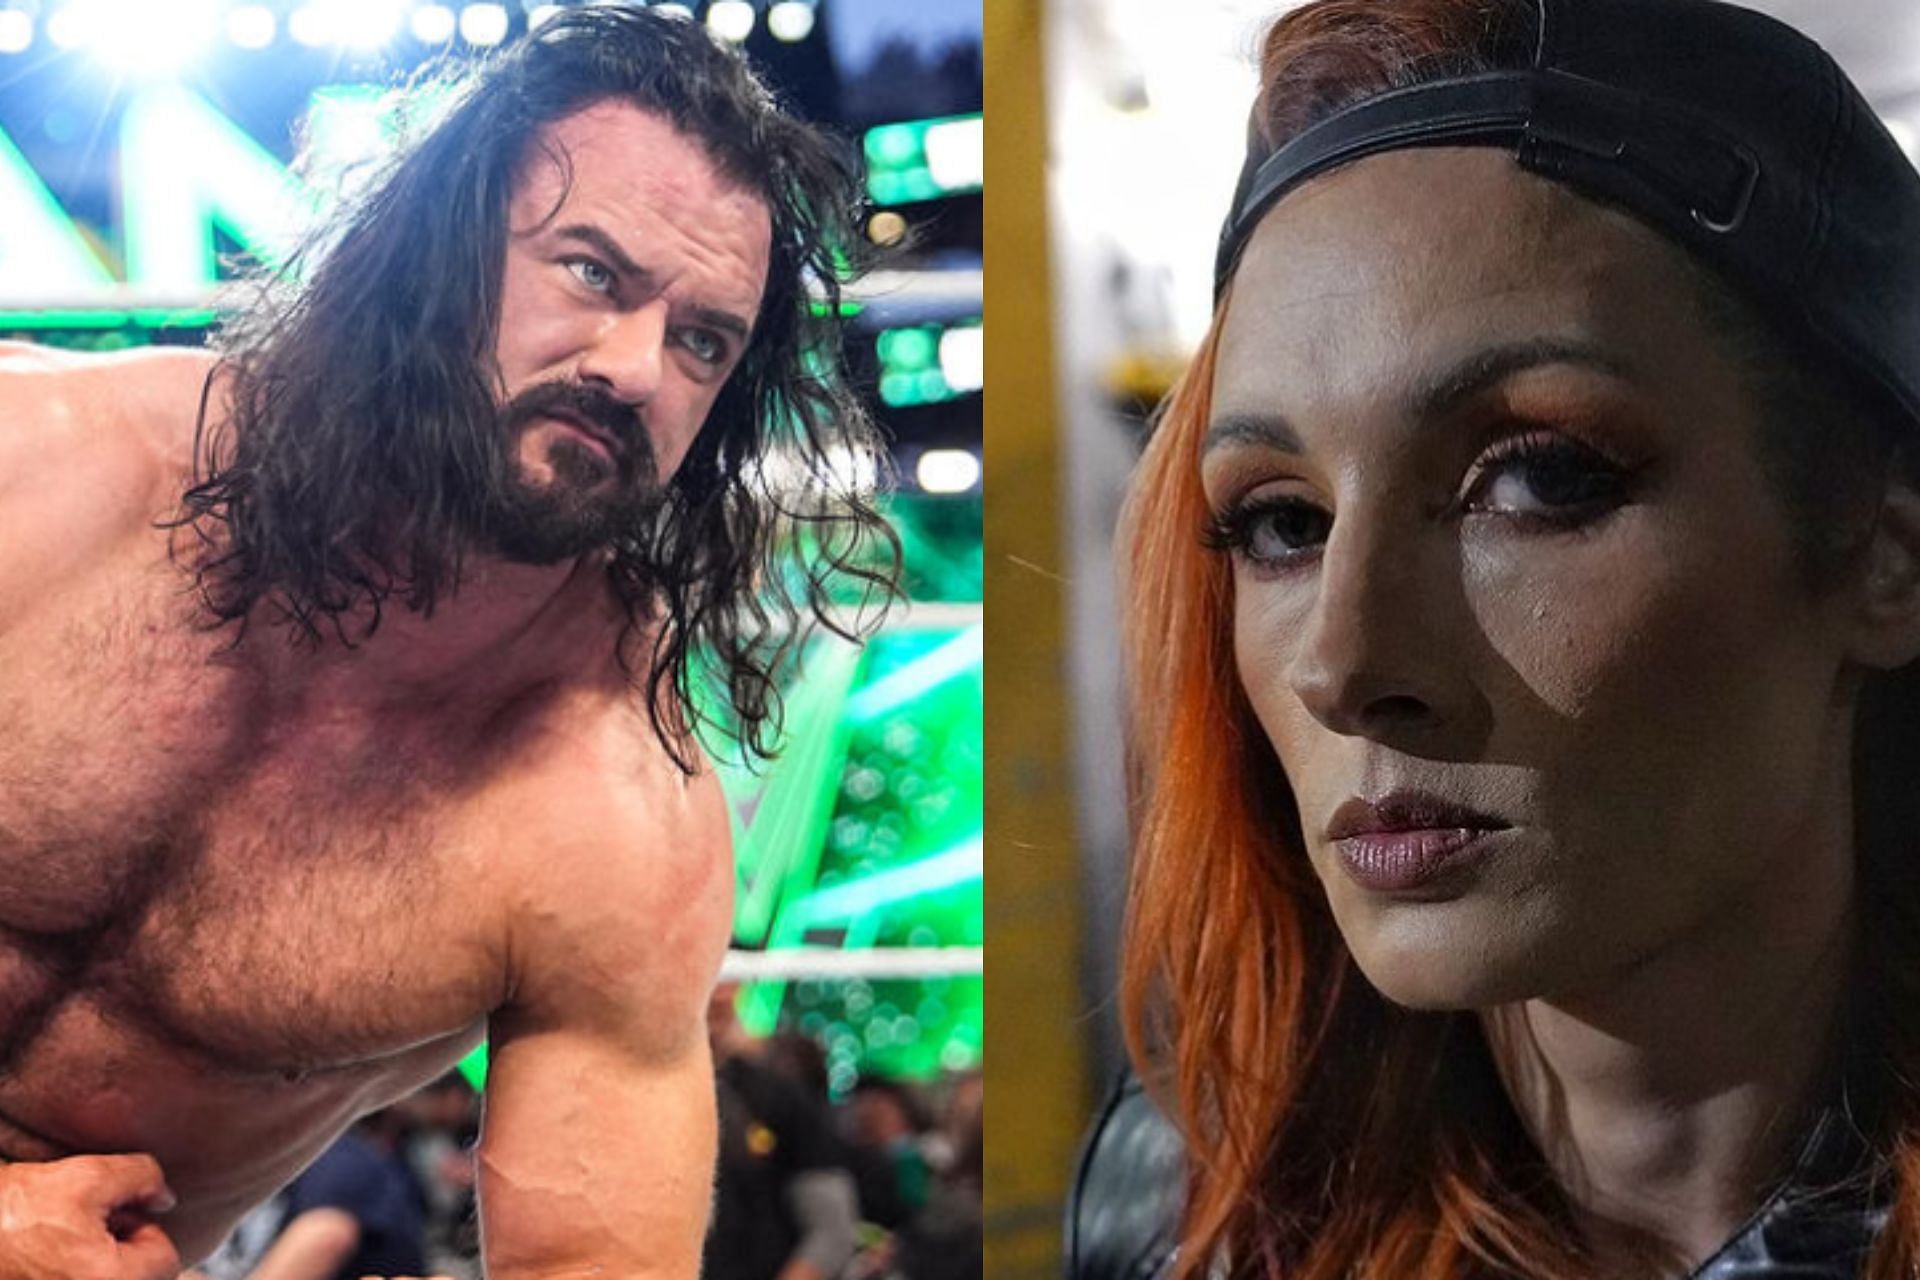 WWE Veteran has his thoughts about Becky Lynch and Drew McIntre moving to AEW [Image Source: Becky Lynch Instagram and WWE Gallery]